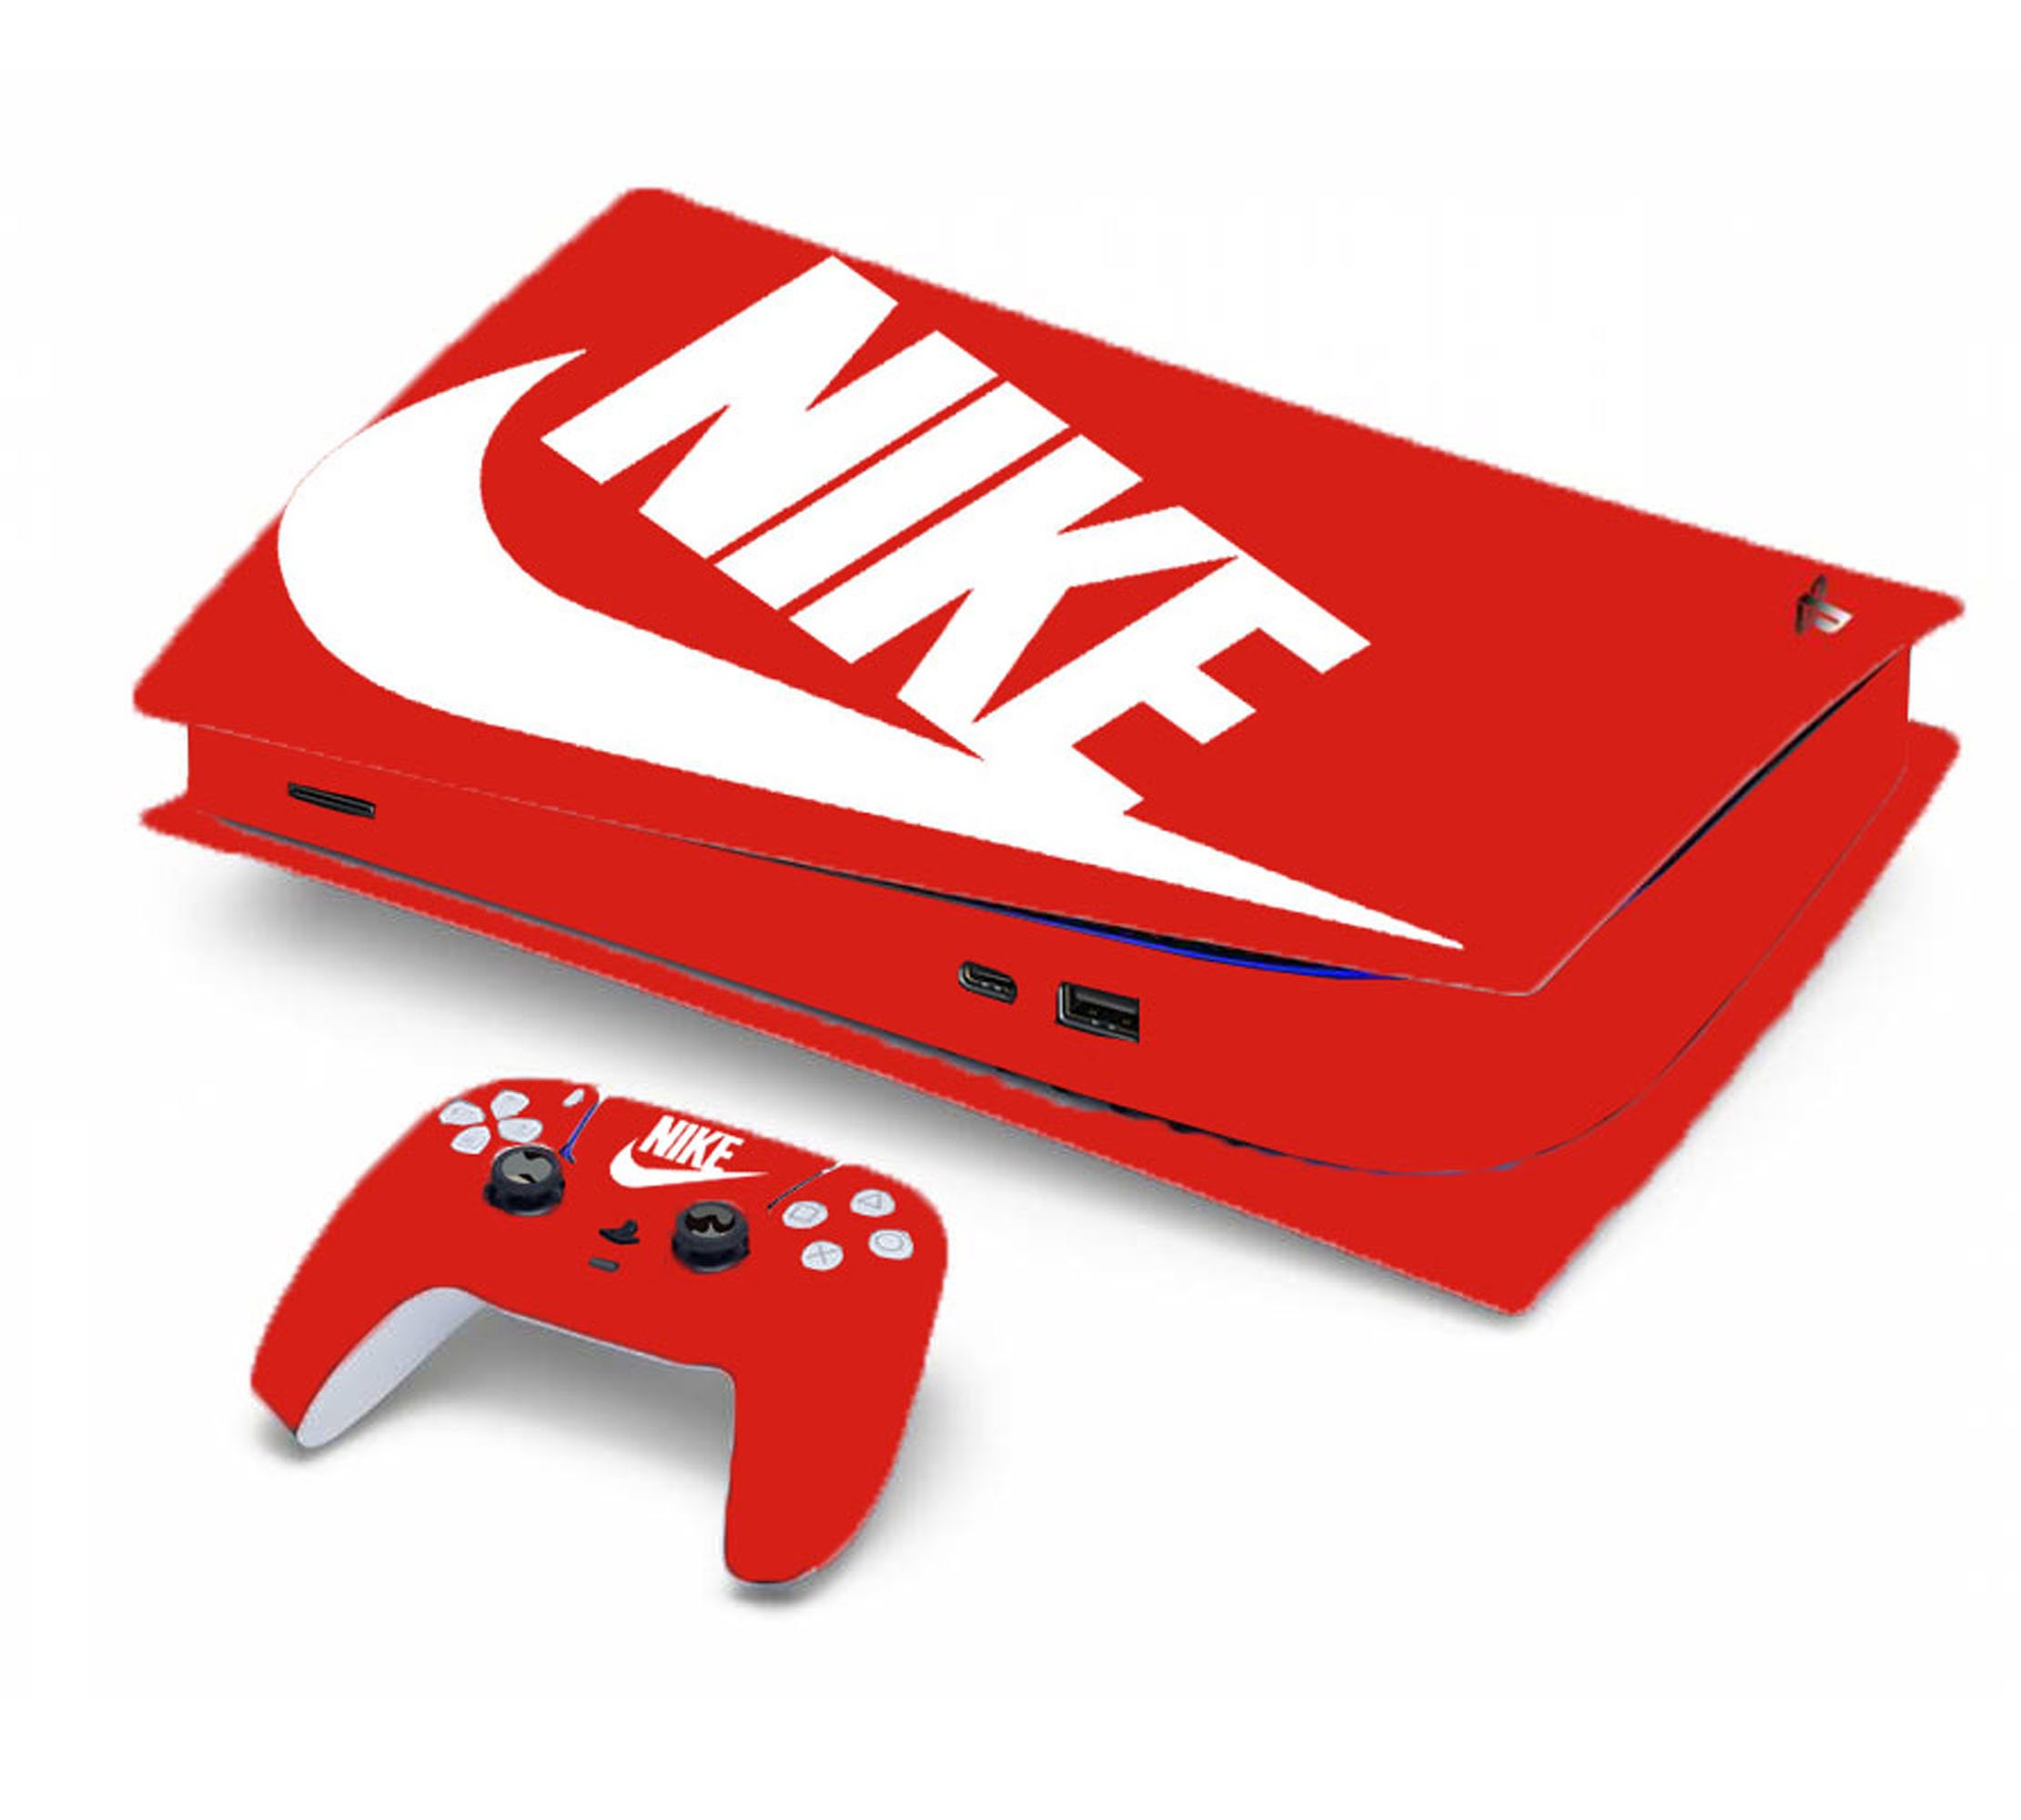 Full Set Skin Decal for PS5 Console Disc Edition,Red Dead Redemption 2  Sticker Vinyl Decal Cover Wrap for Playstation 5 Console and 2 Controllers:  : PC & Video Games